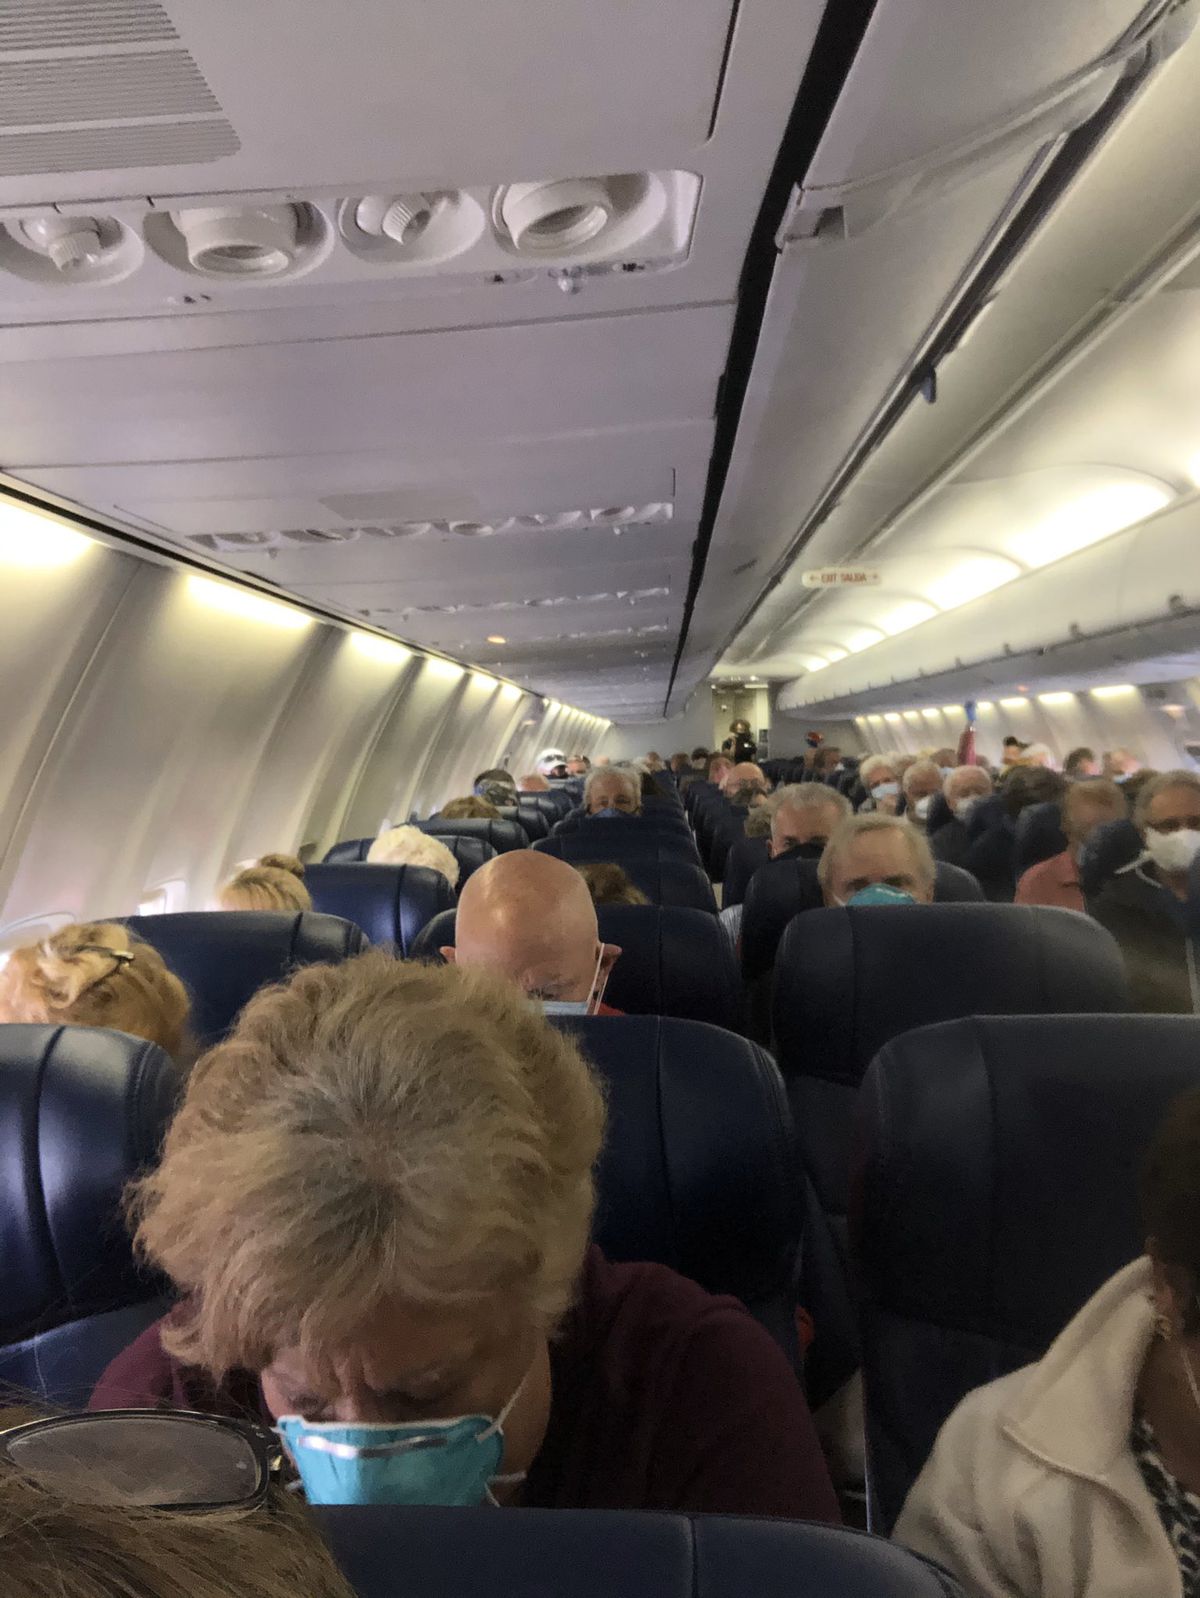 A crowded plane with elderly masked people.